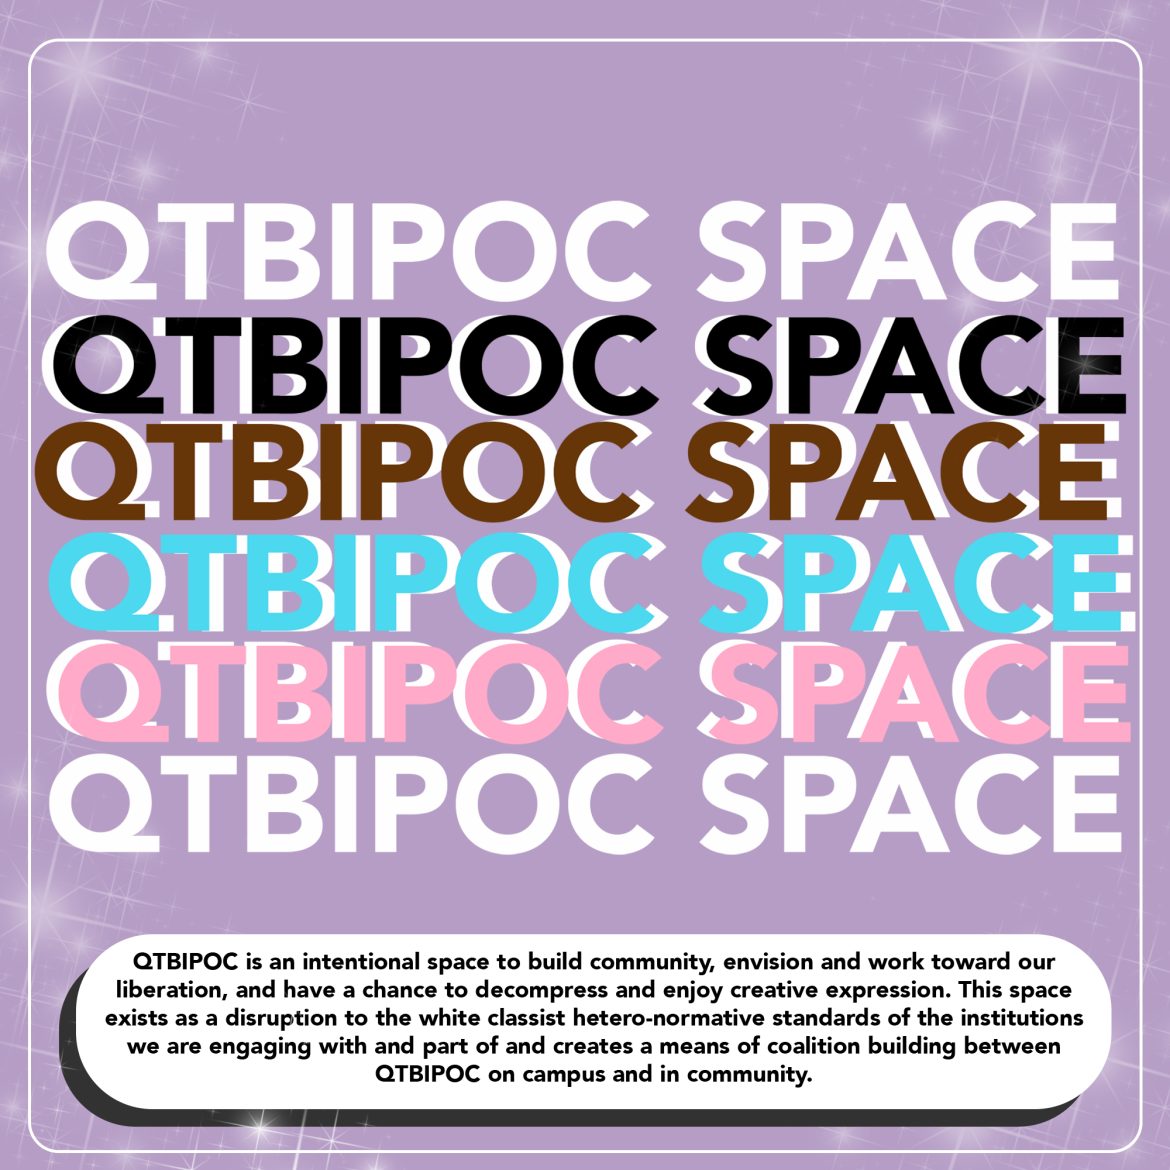 A lavender flyer with a thin white line border and sparkles in the background. The headline text QTBIPOC SPACE is in caps down the flyer in text that is white, black, grown, light blue, pink, and white again. The body text is in a bubble that reads, "QTBIPOC is an intentional space to build community, envision and work toward our liberation, and have a chance to decompress and enjoy creative expression. This space exists as a disruption to the white classist hetero-normative standards of the institutions."